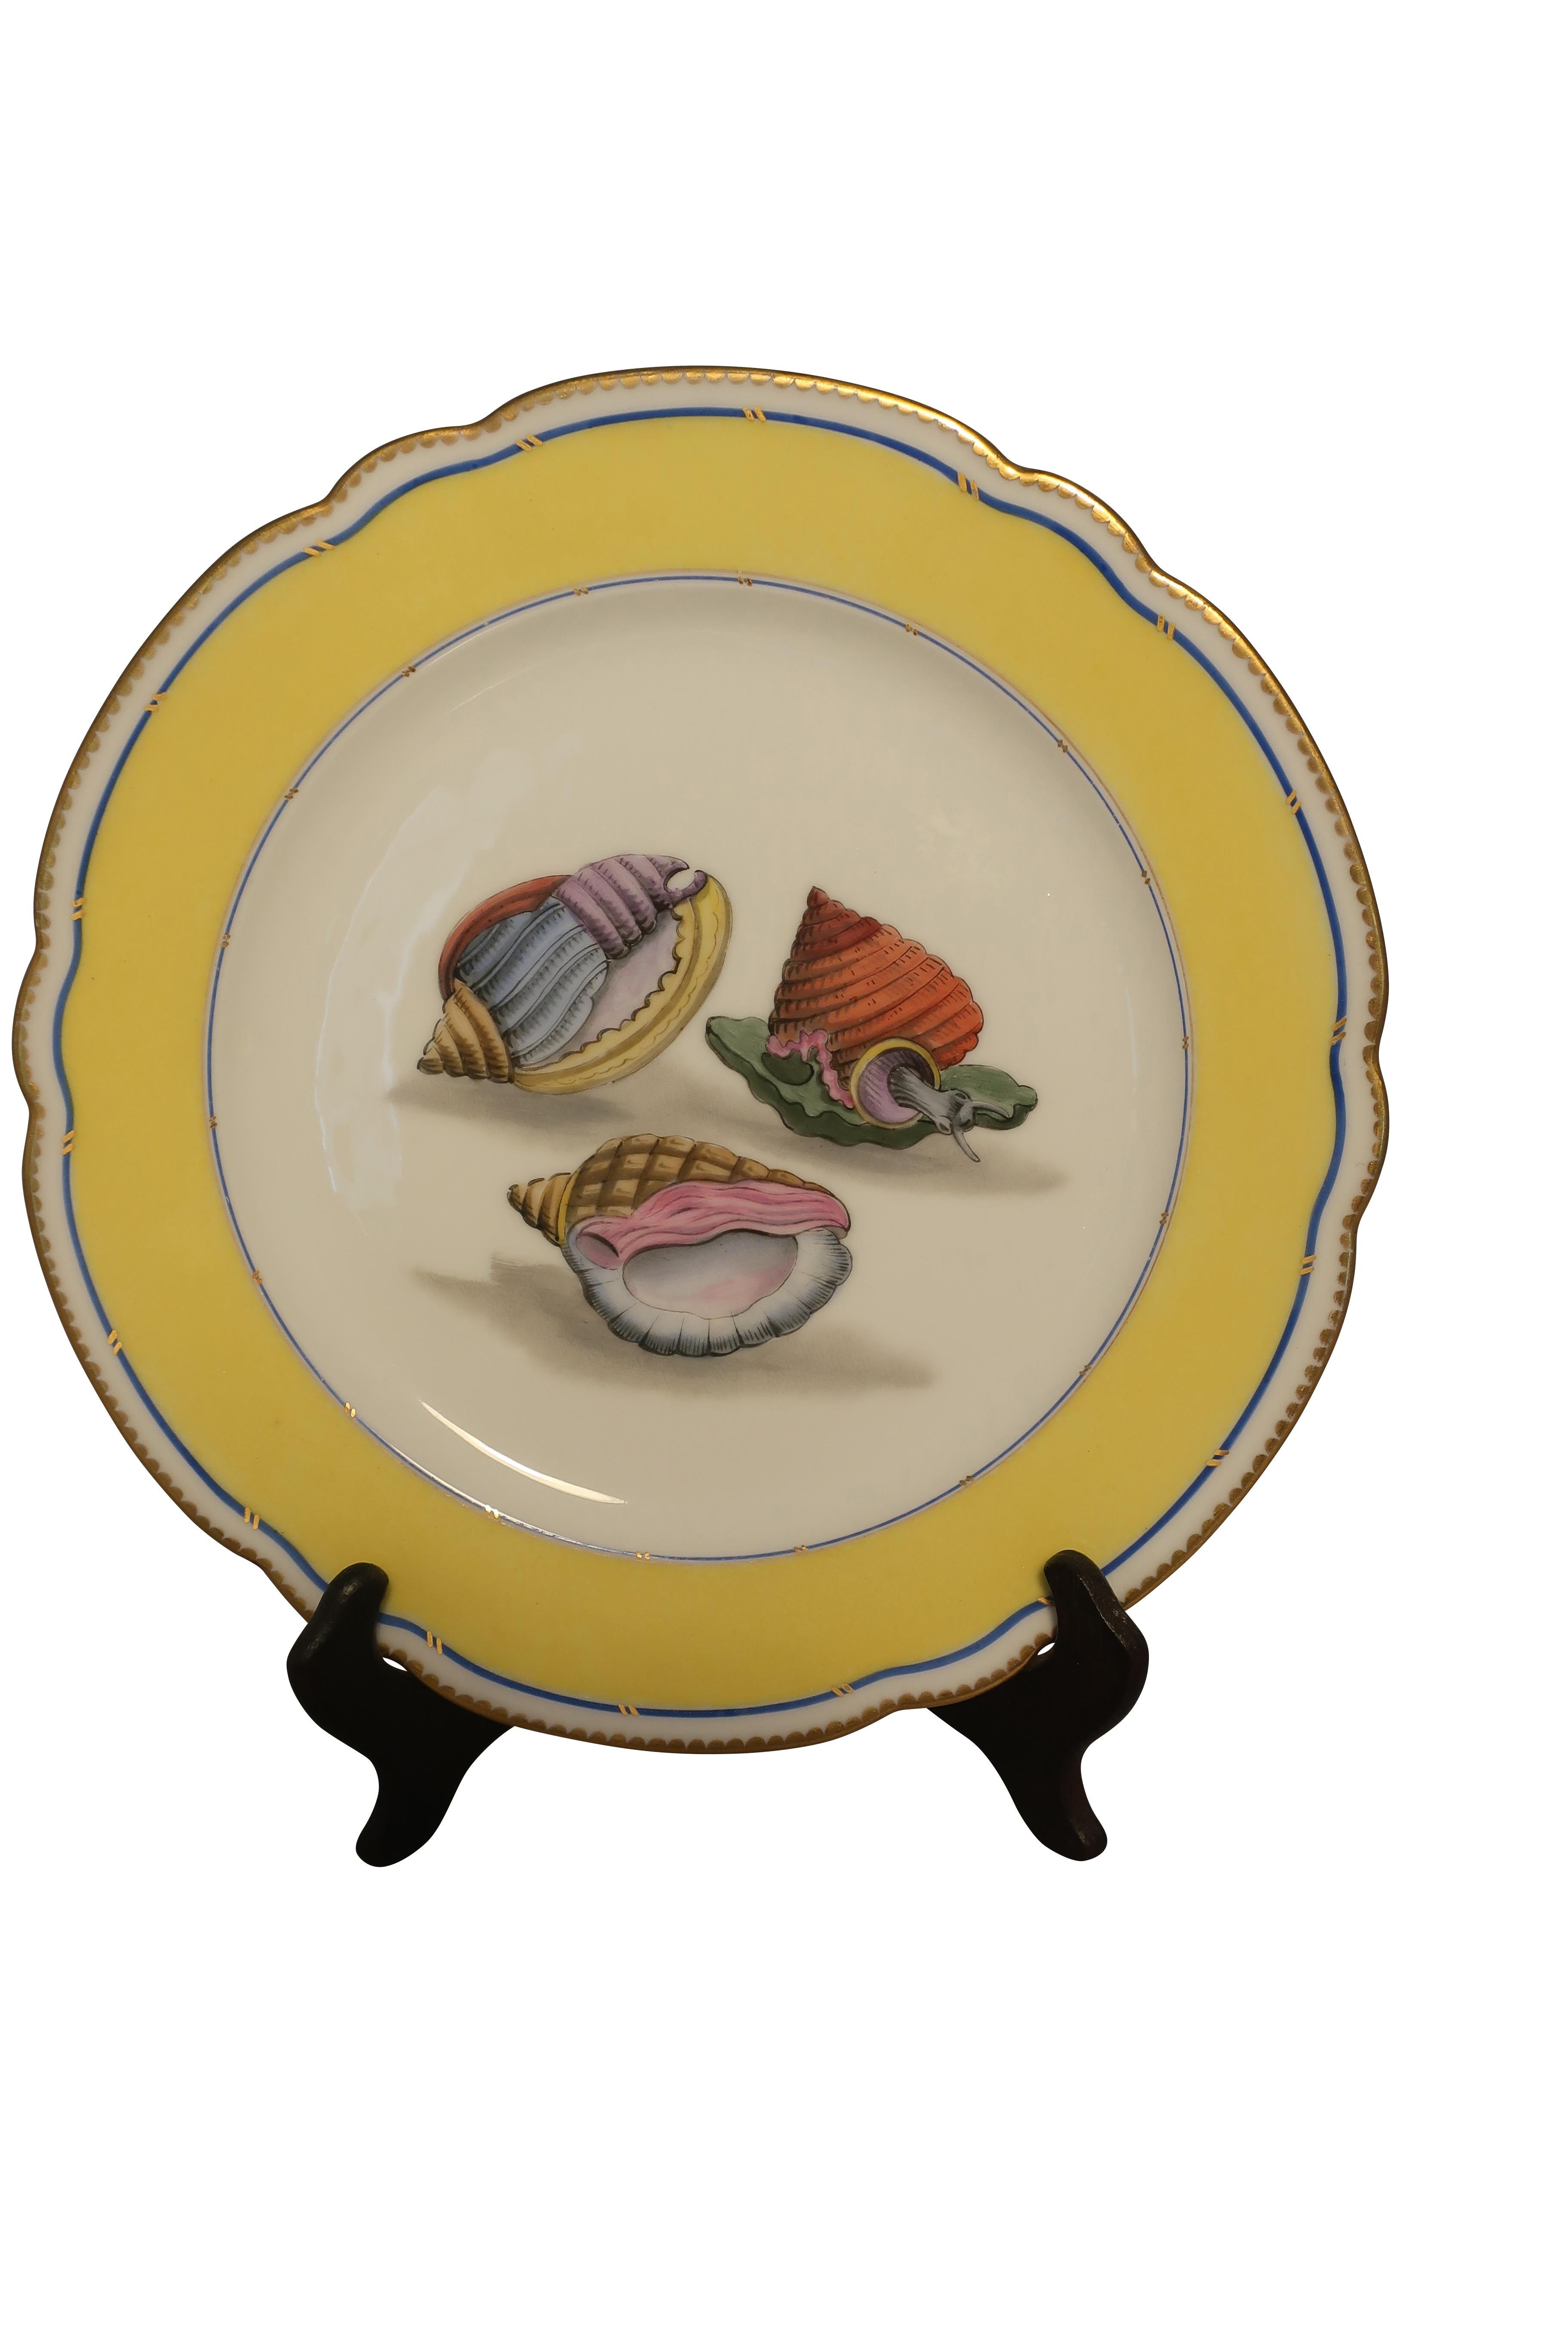 20th Century Sea Shell Porcelain Plates French Rousseau, Set of 6 or 12